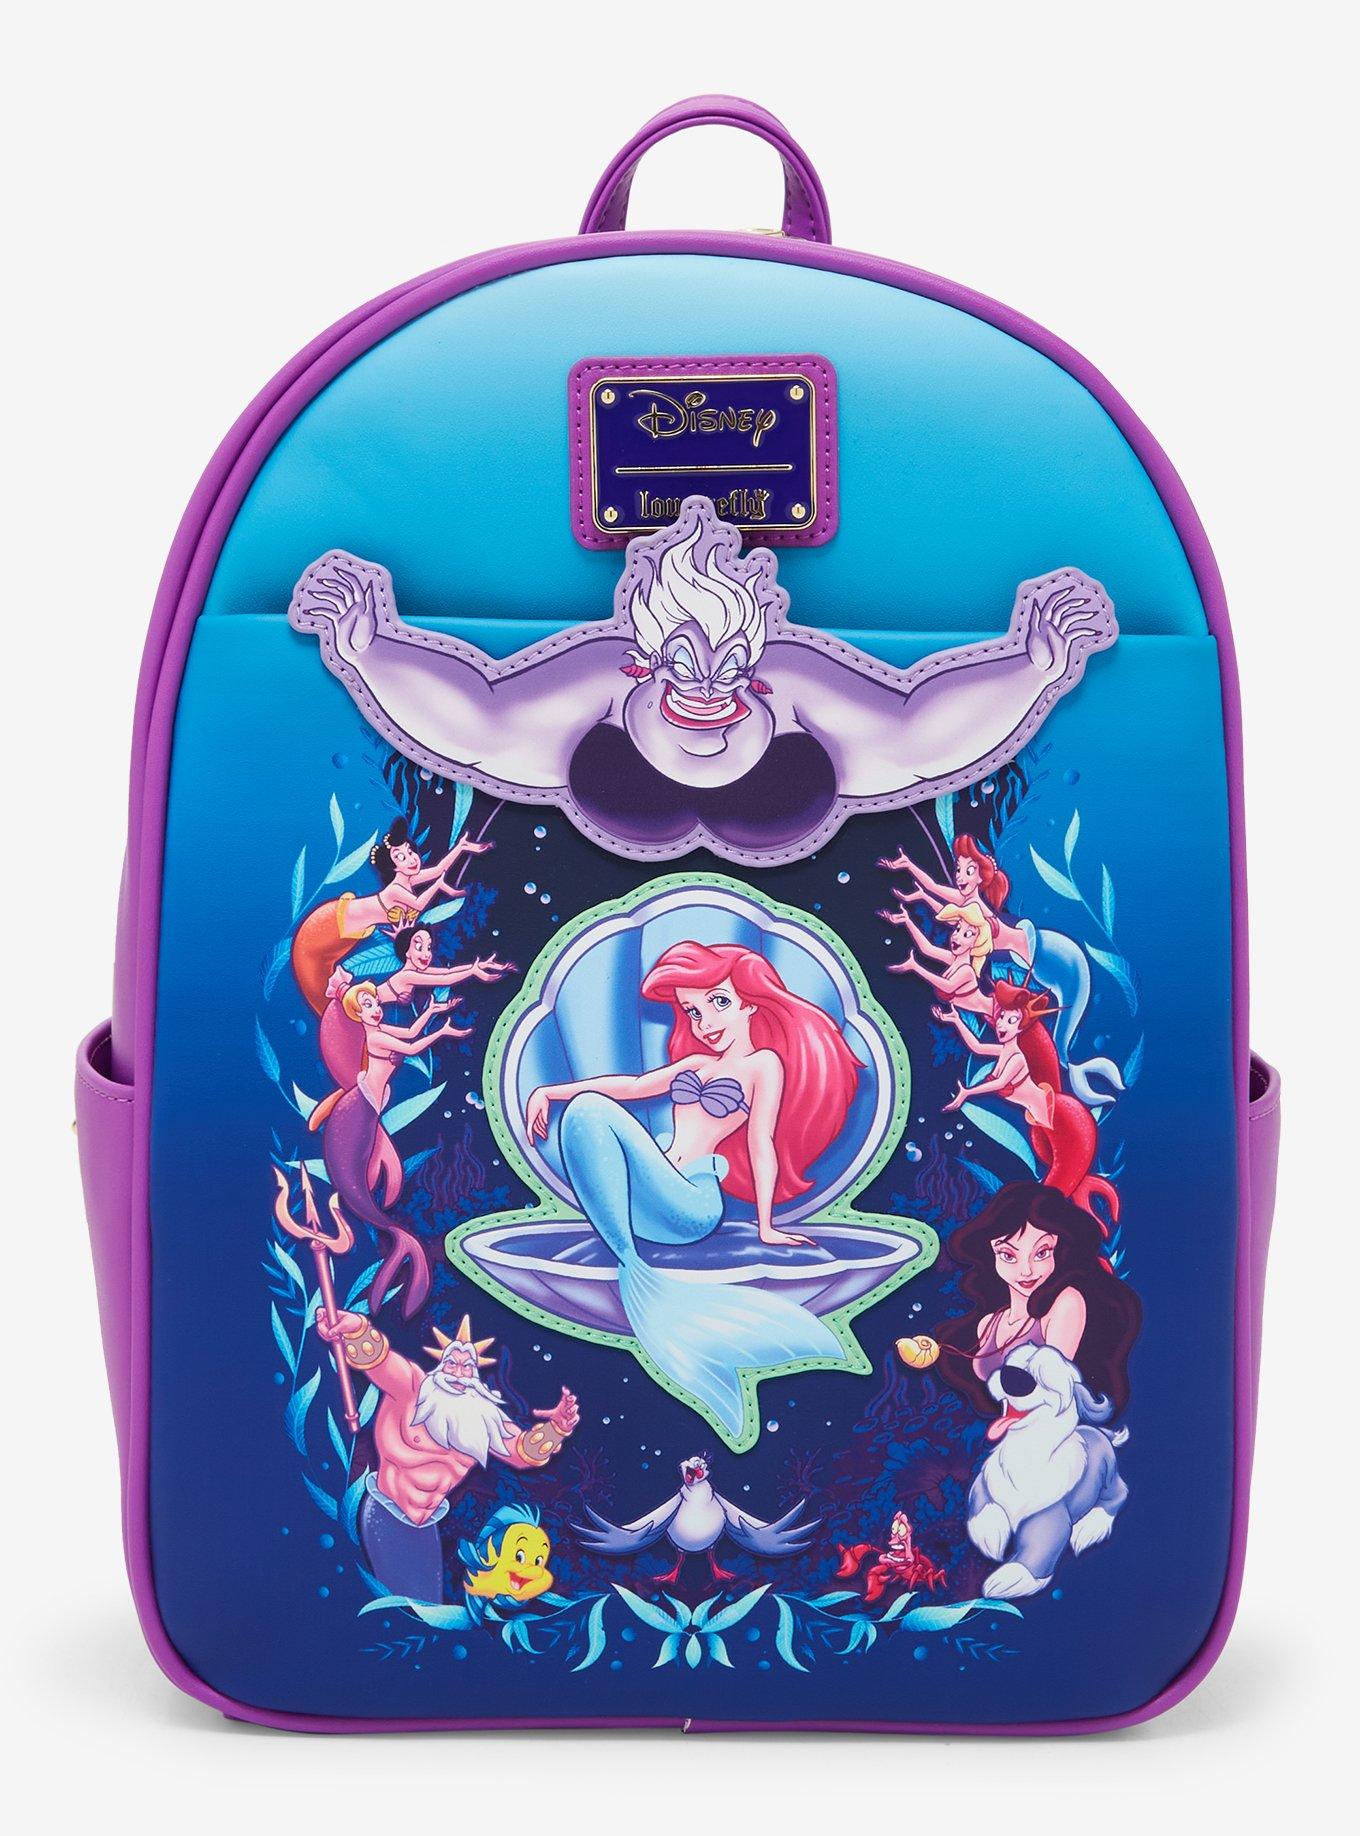 Ursula Mini Backpack by Loungefly – The Little Mermaid